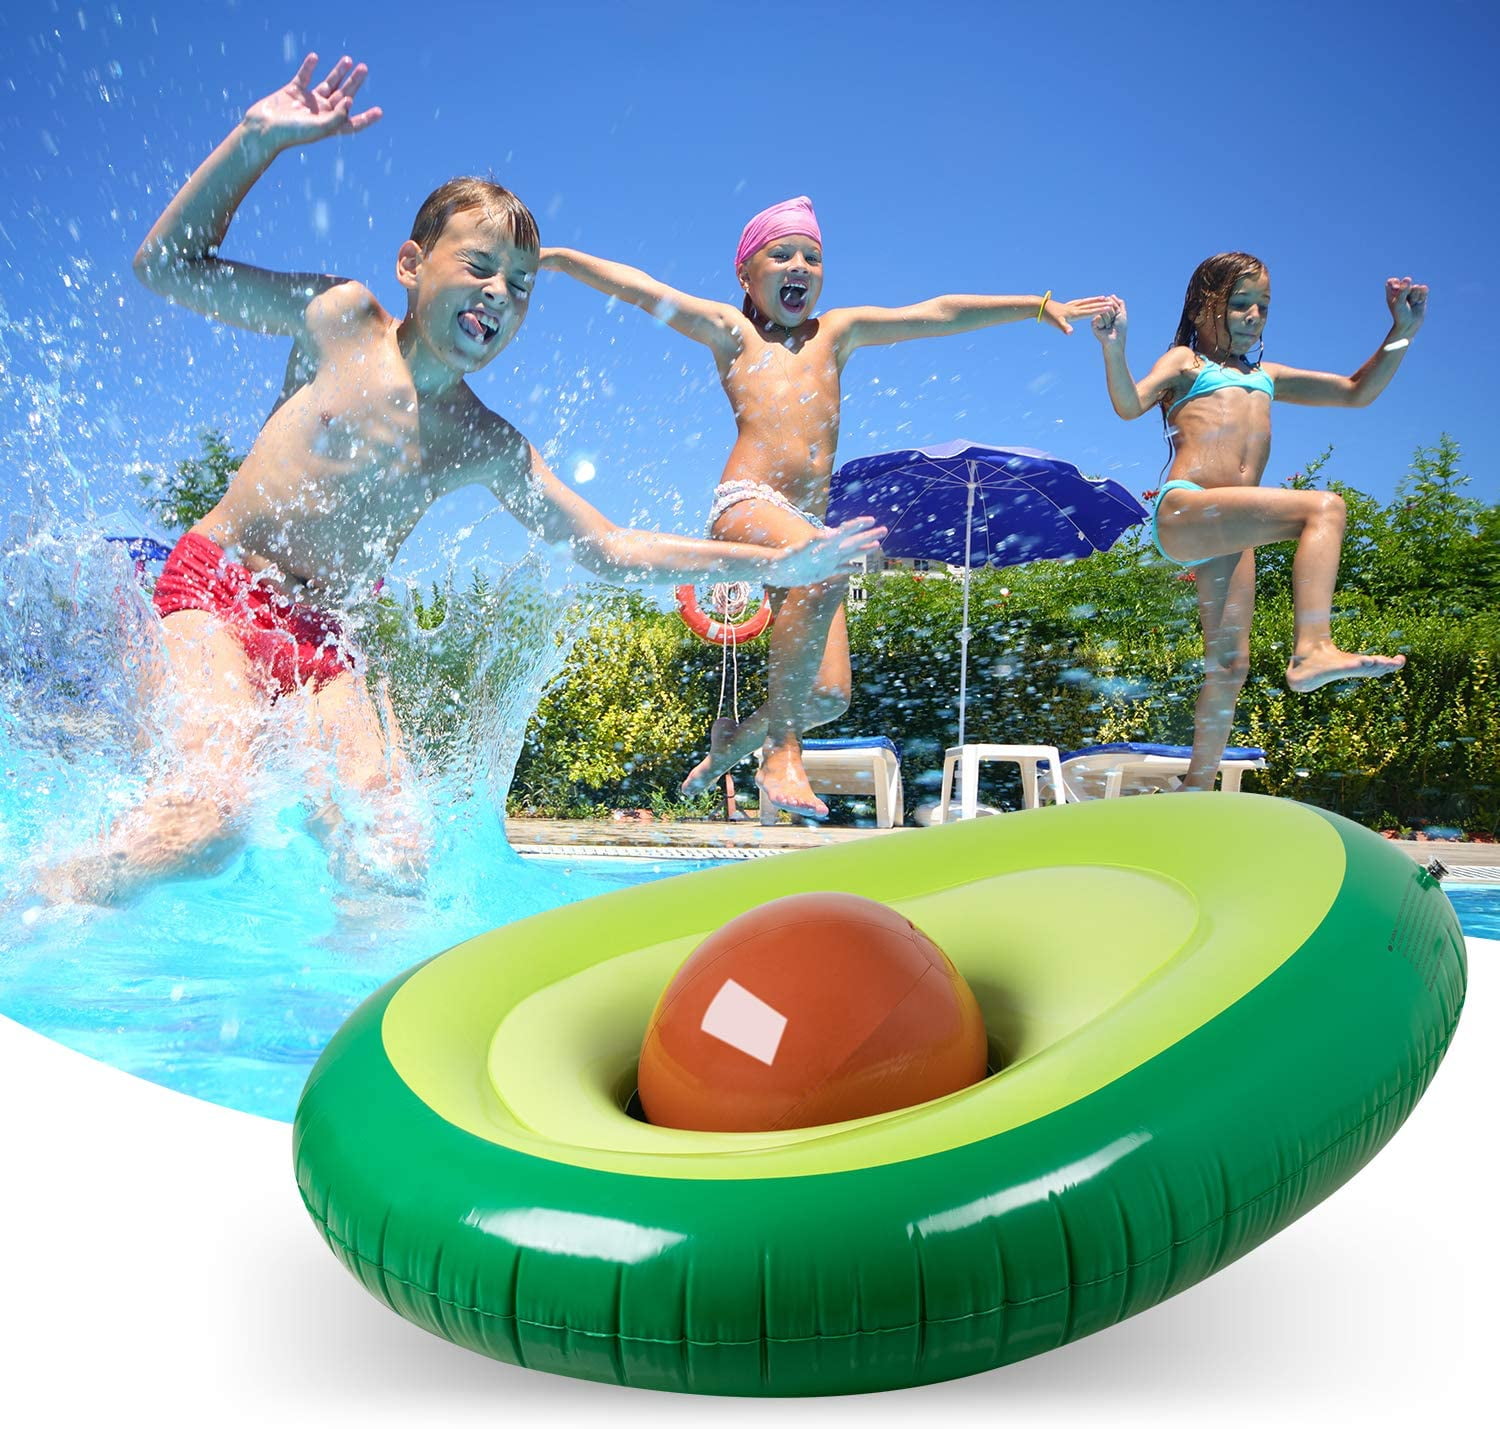 Obuby Inflatable Avocado Pool Float Floatie with Ball Fun Pool Floats Floaties S 